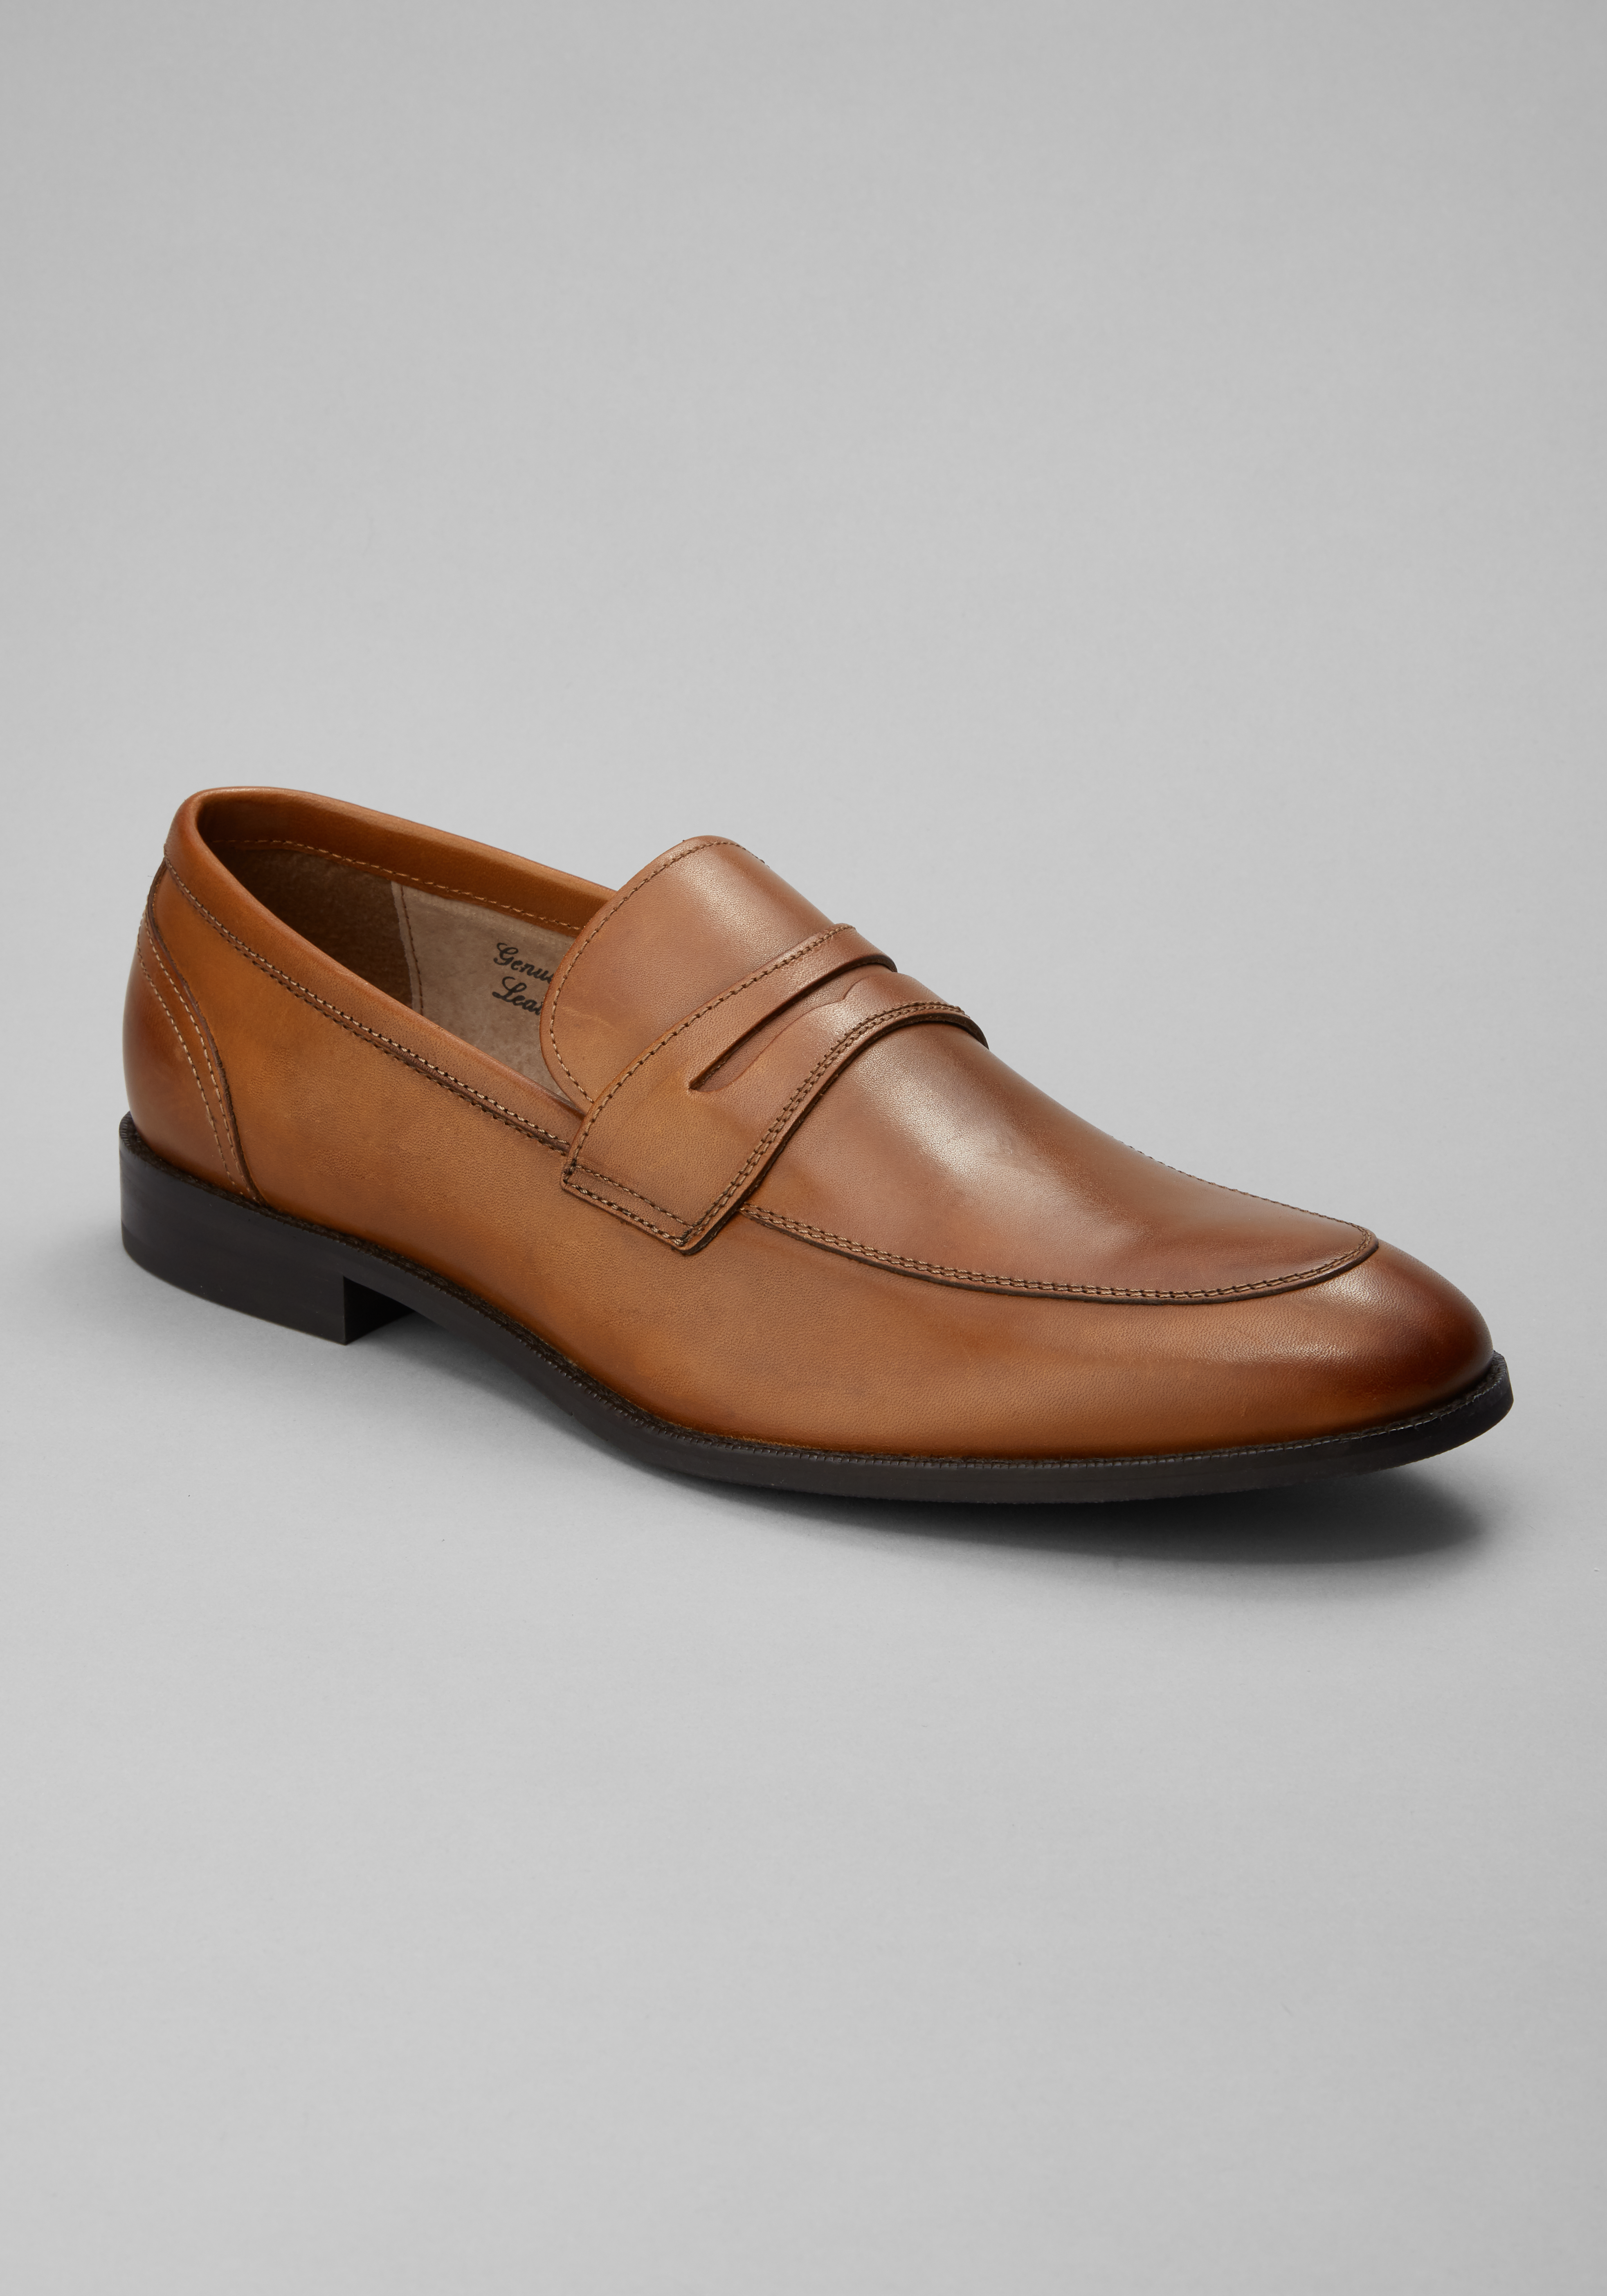 Loafers Men's Clearance Loafers JoS. A. Bank